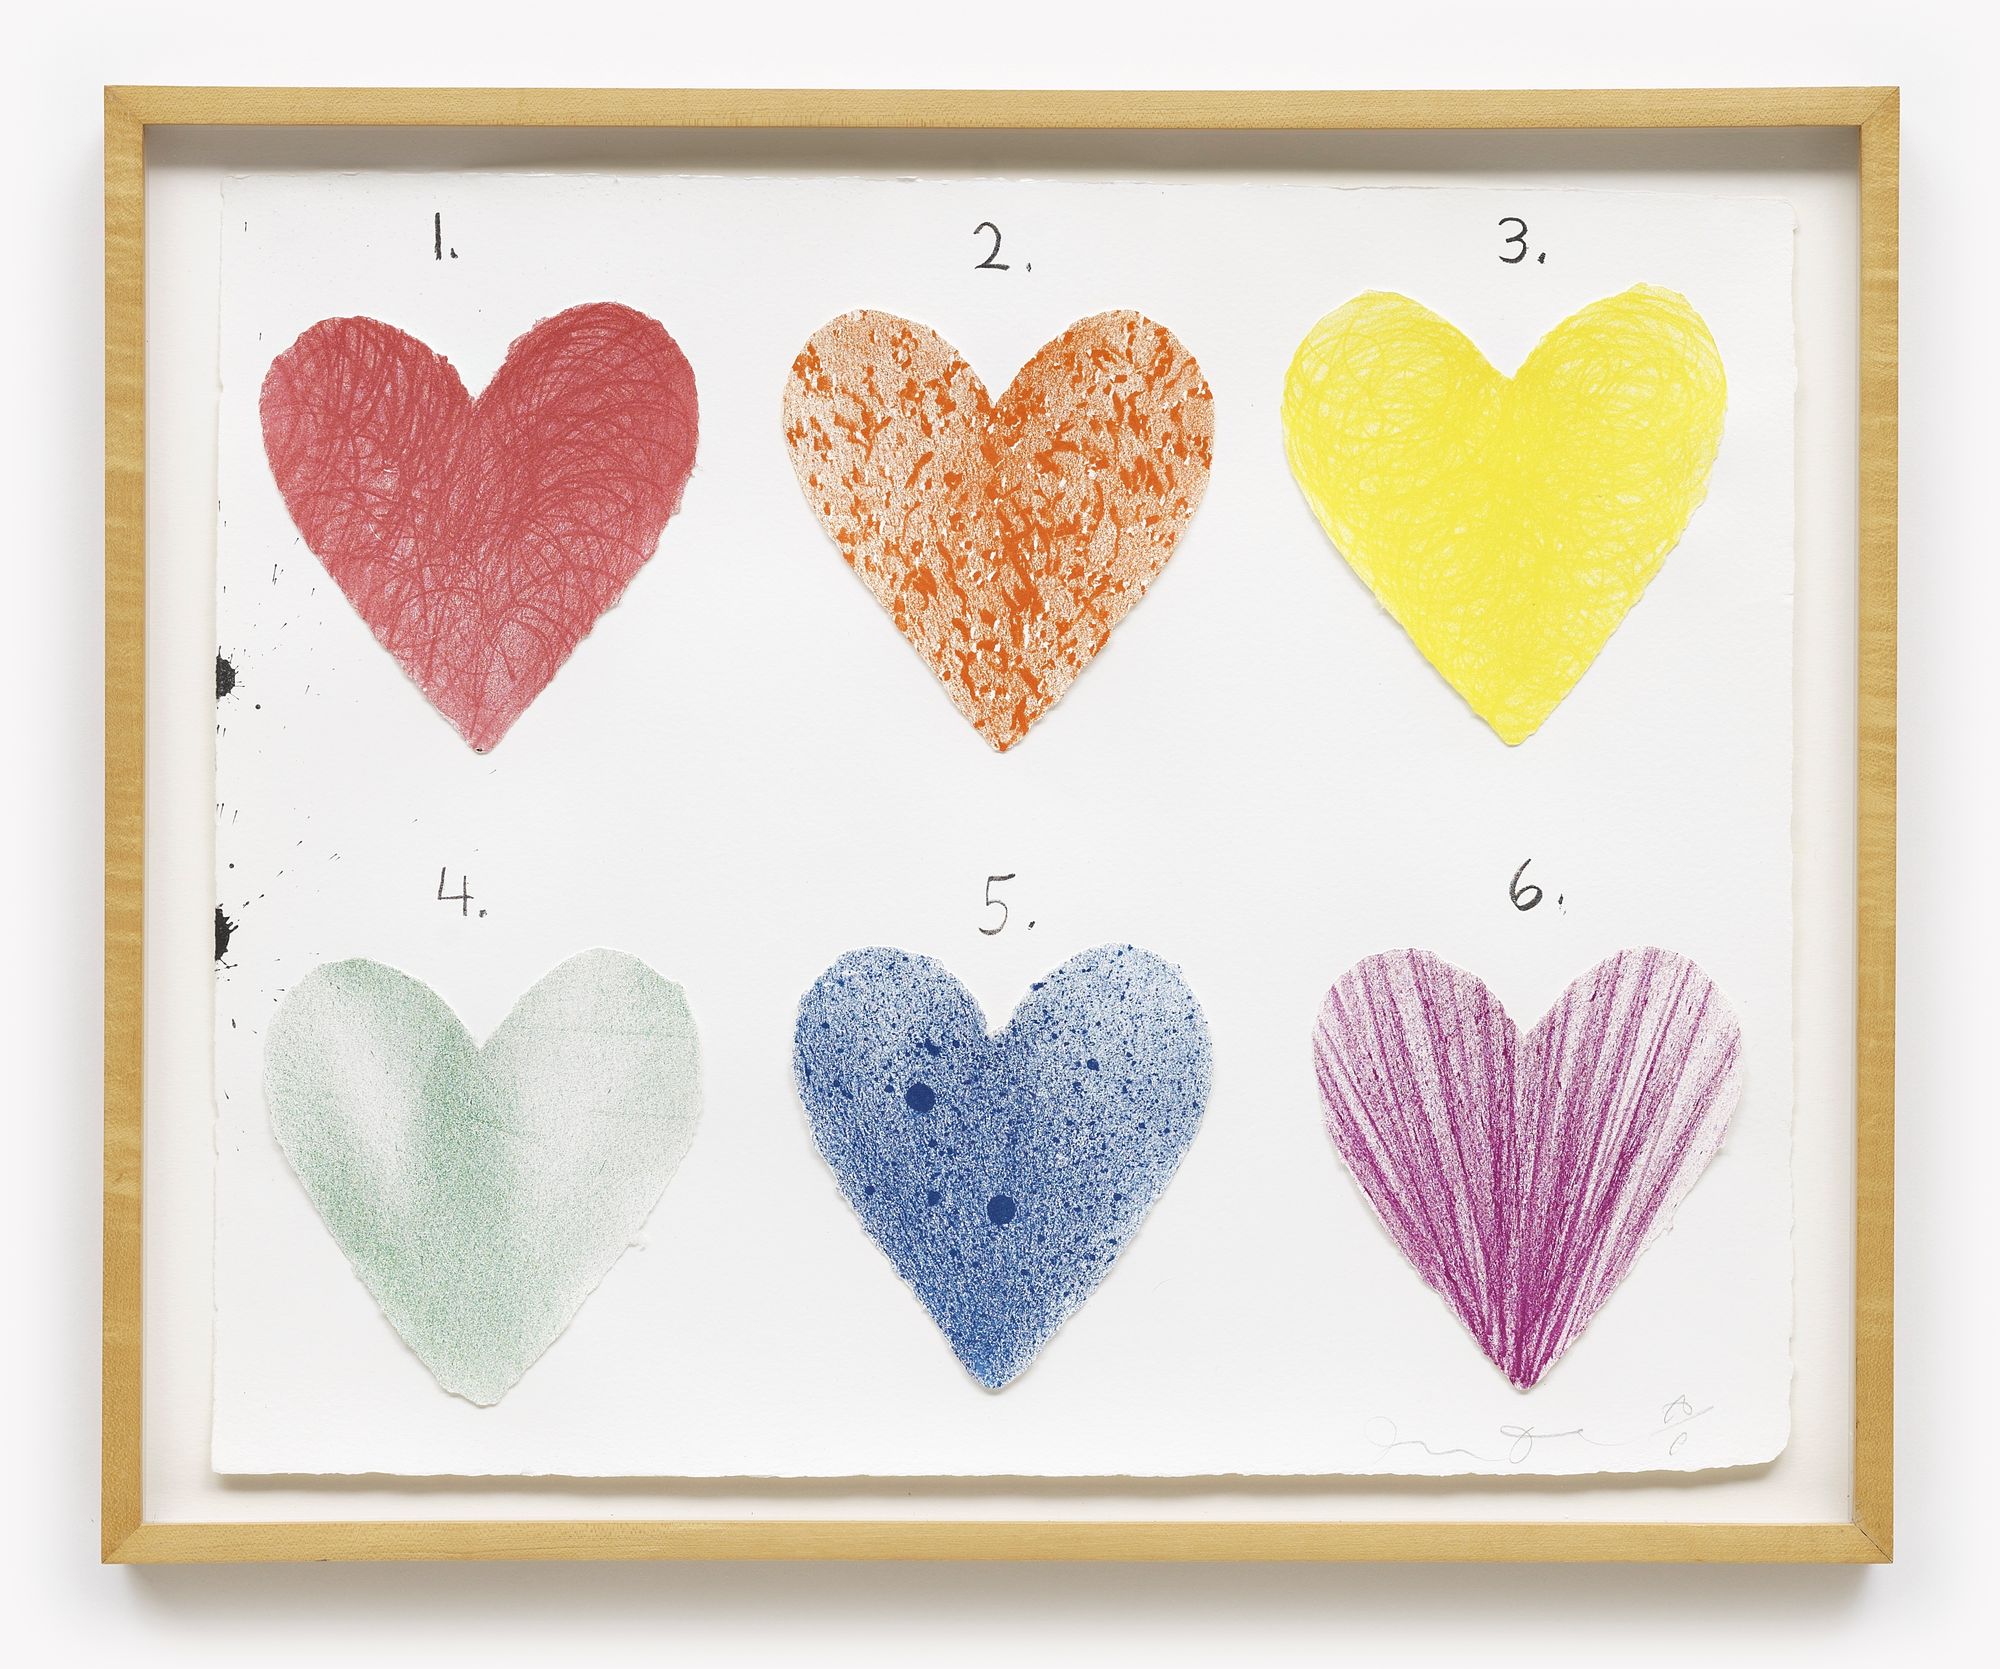 Jim Dine, 'Jim Dine Solo Exhibition' at Mo J Gallery, Seoul, South ...